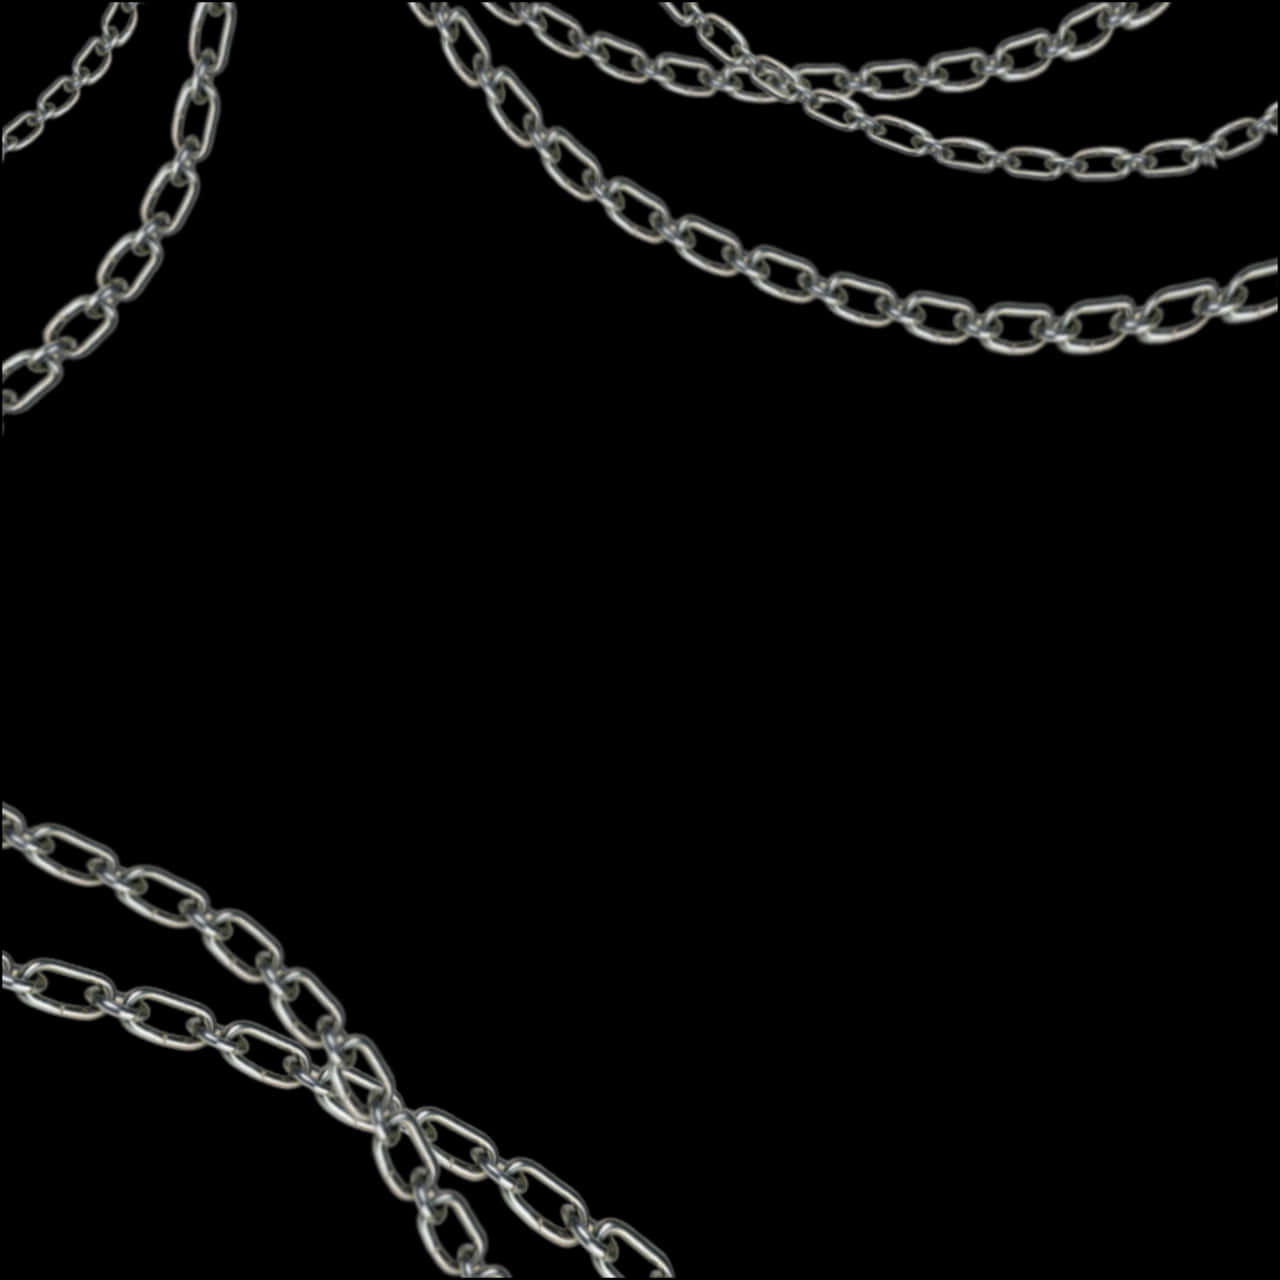 Silver Chains Black Background PNG